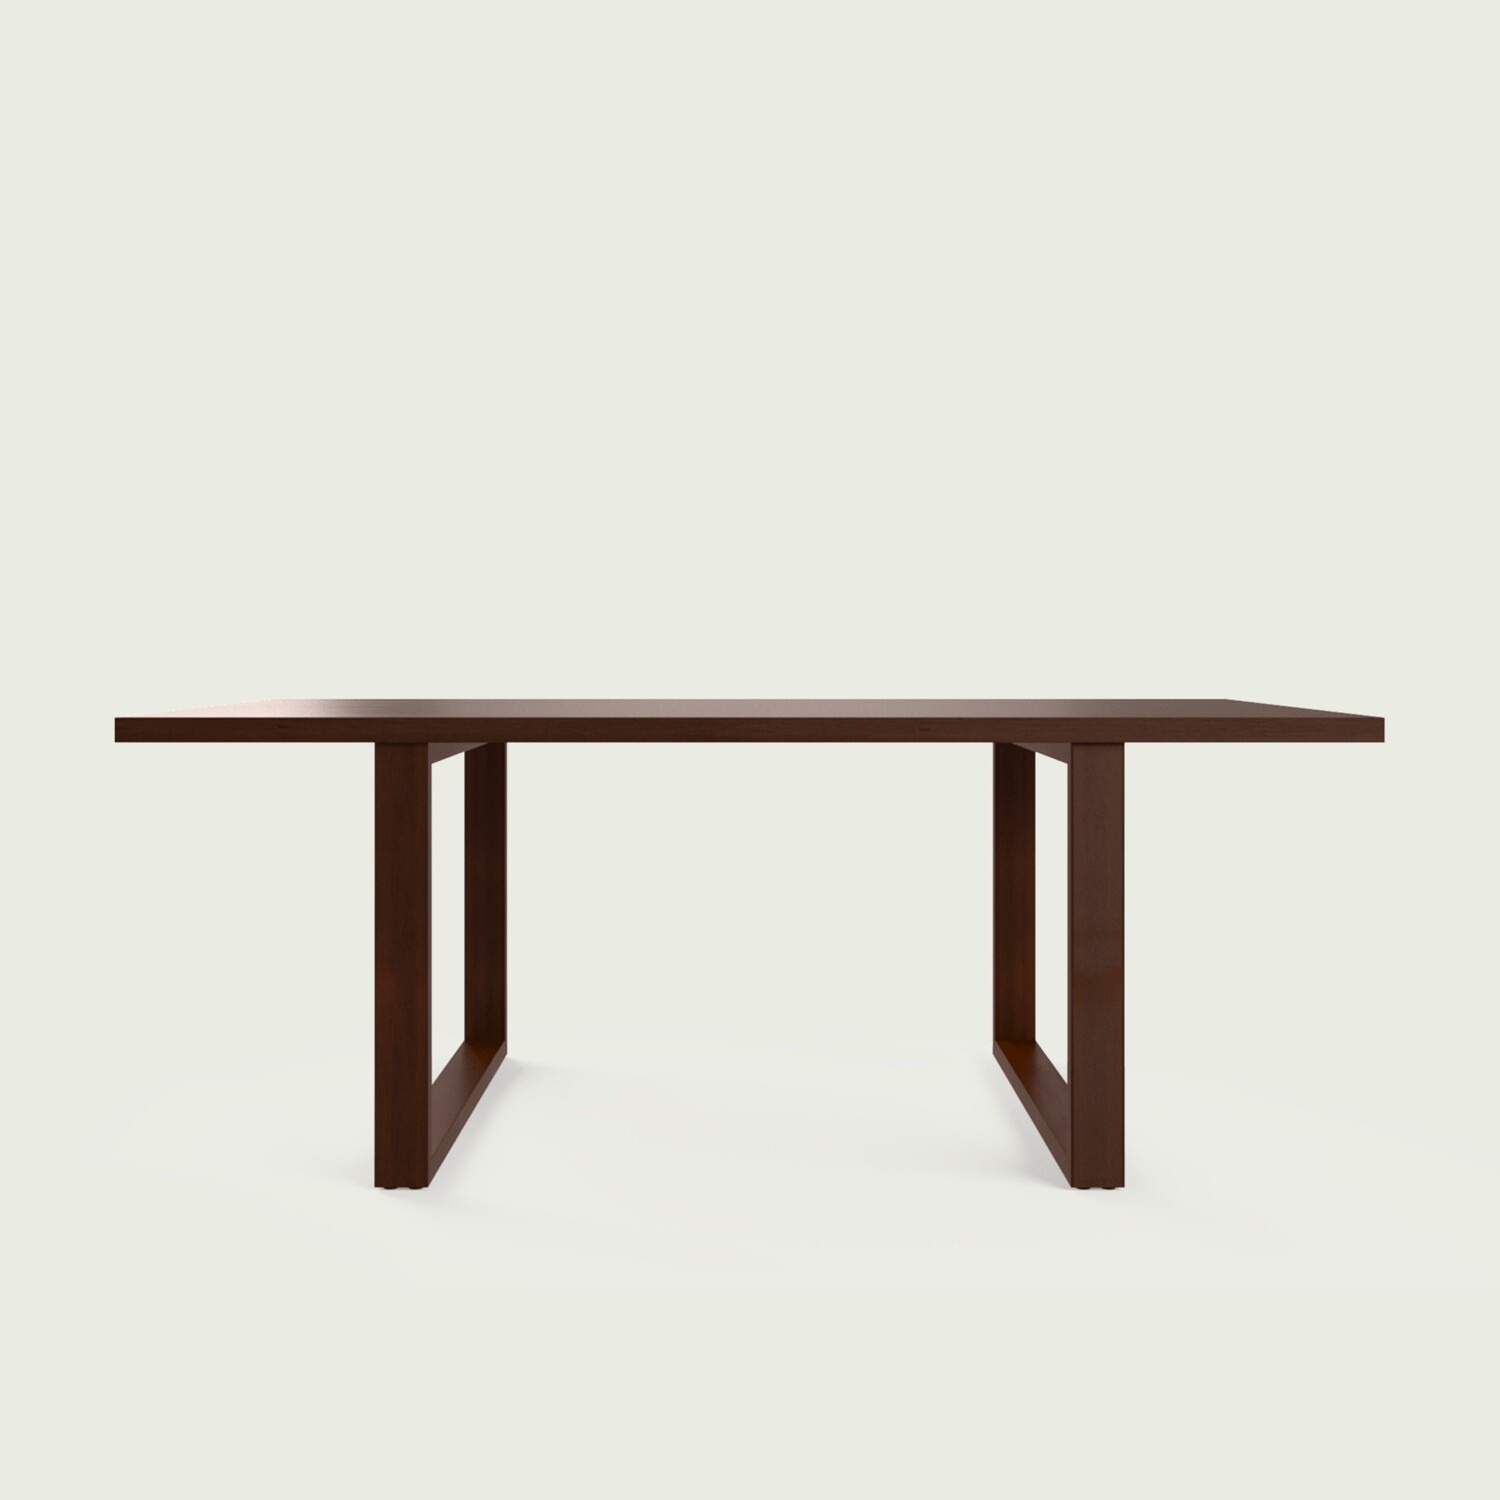 Plaza Luxury Dining Table - 4, 6 & 8 Seater/All Sizes